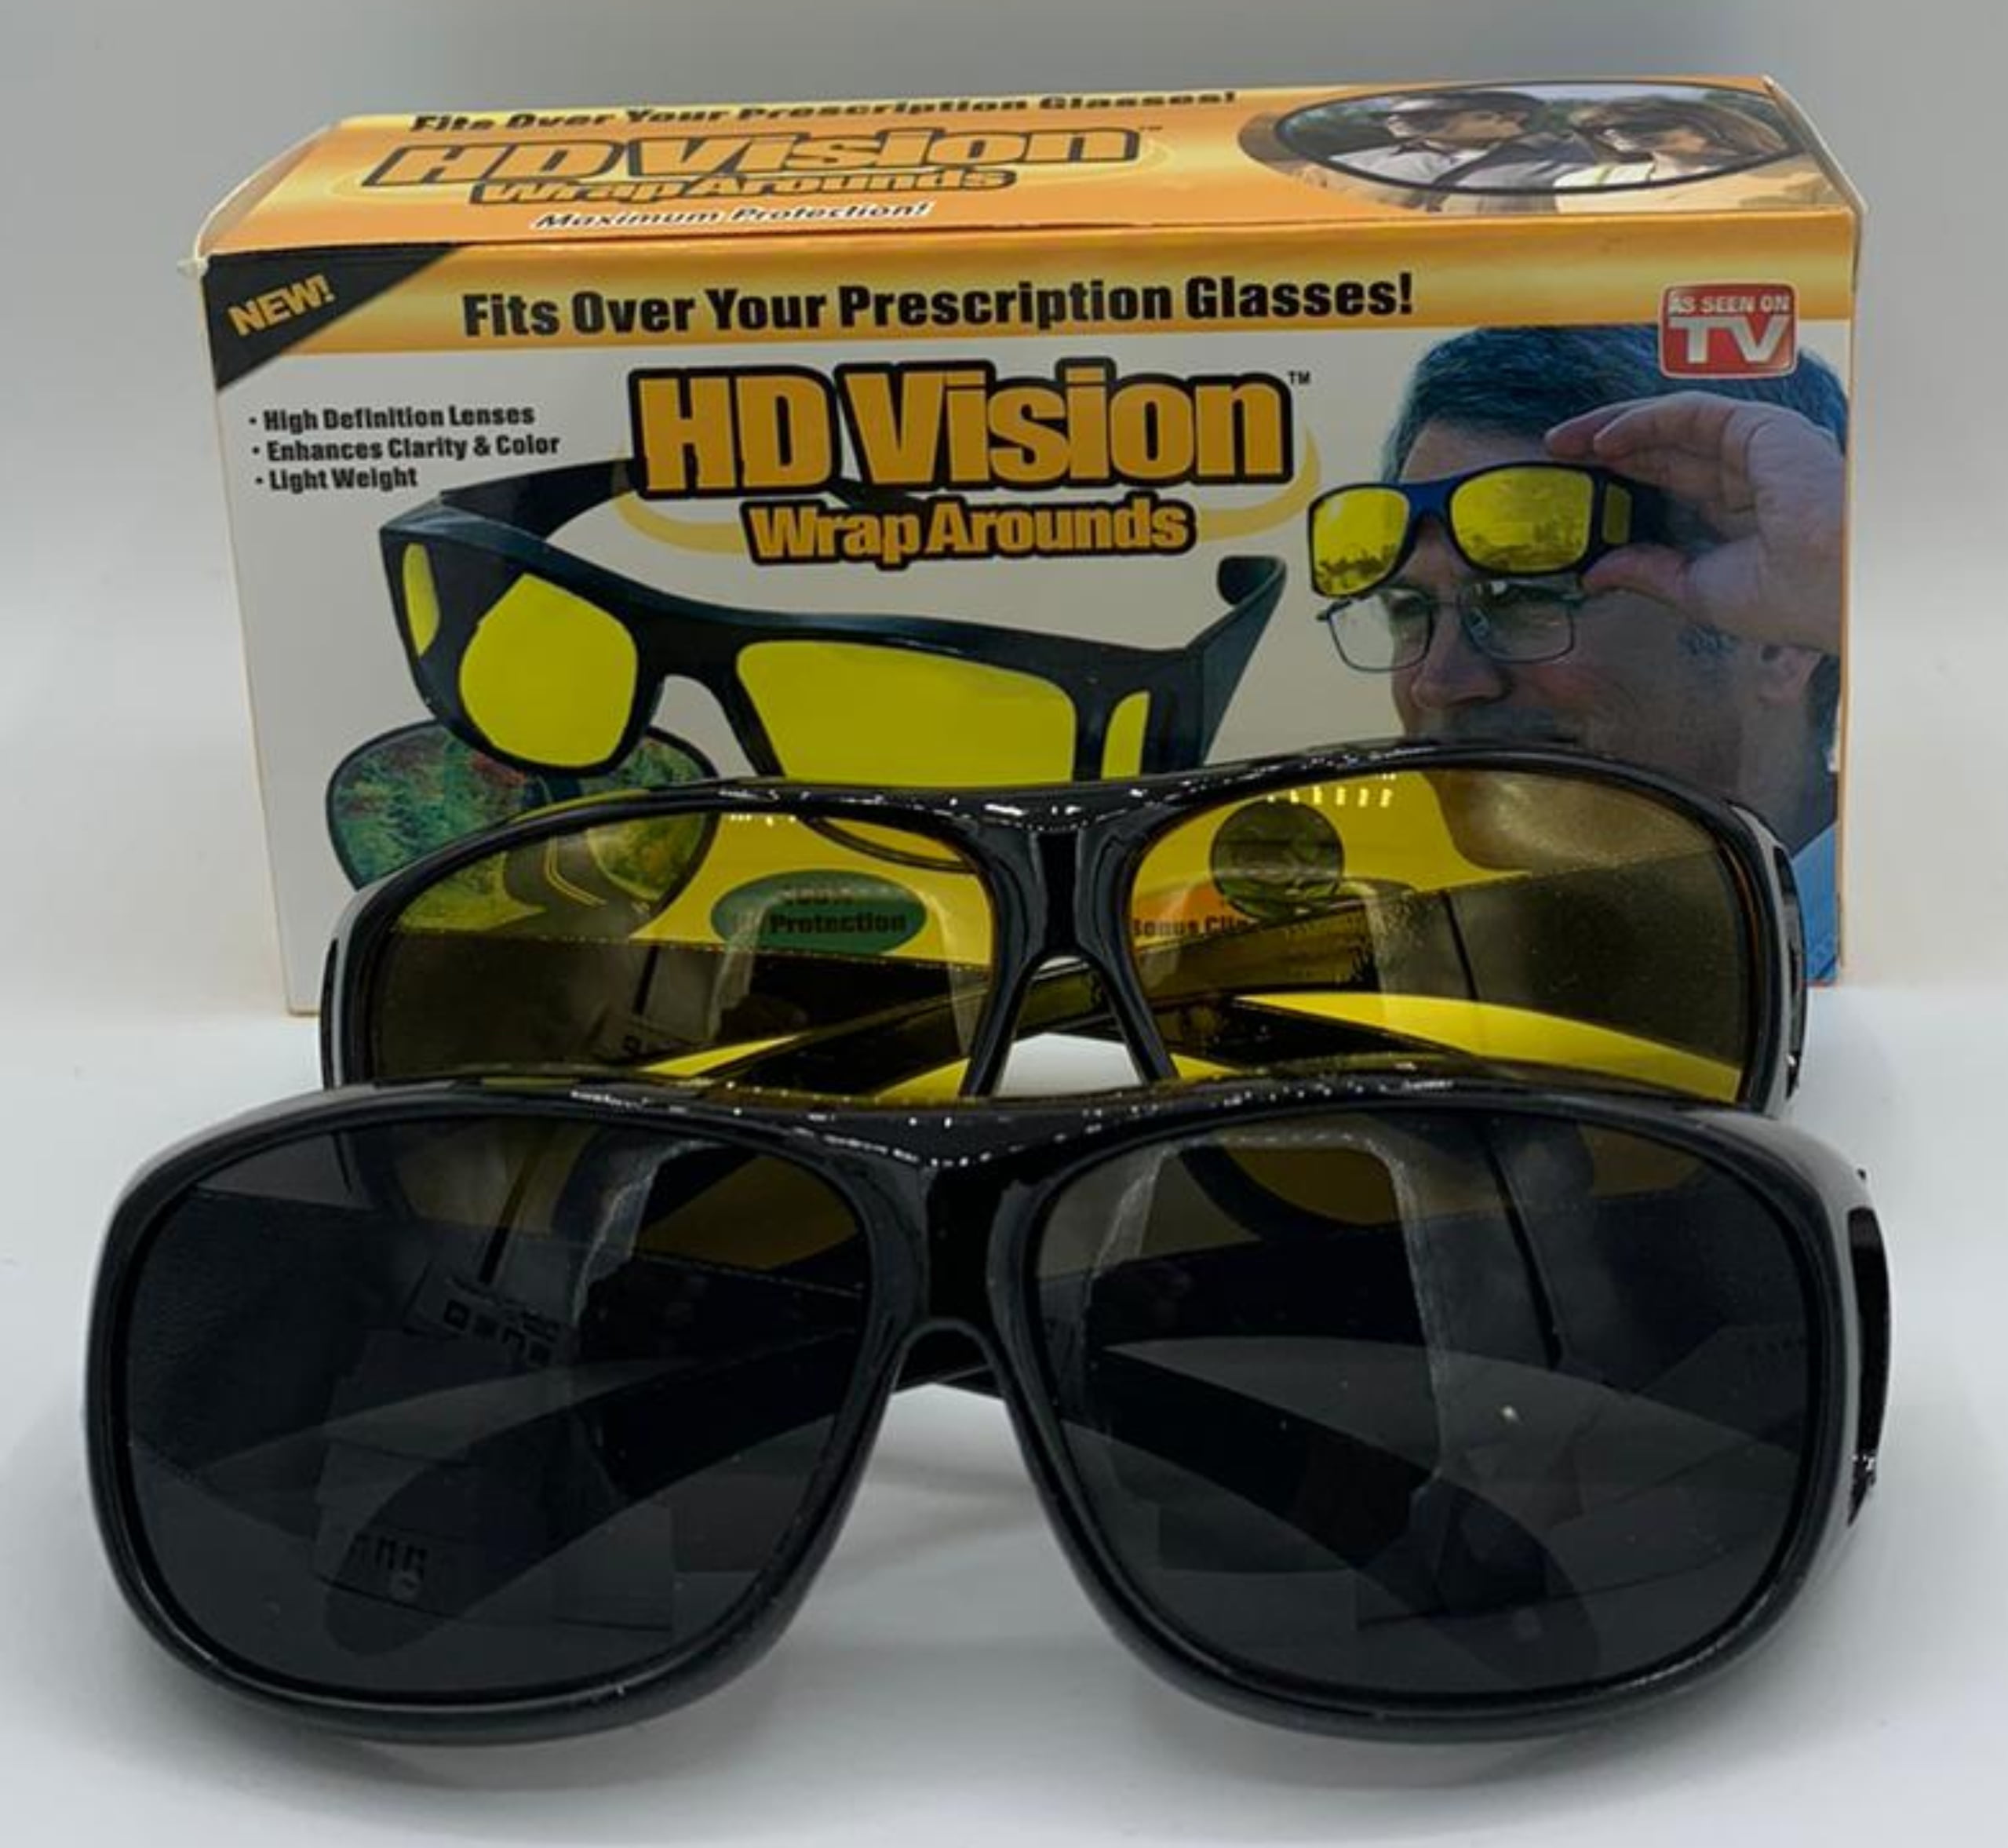 HD Night Vision Wrap-Around Style Glasses - YouTube